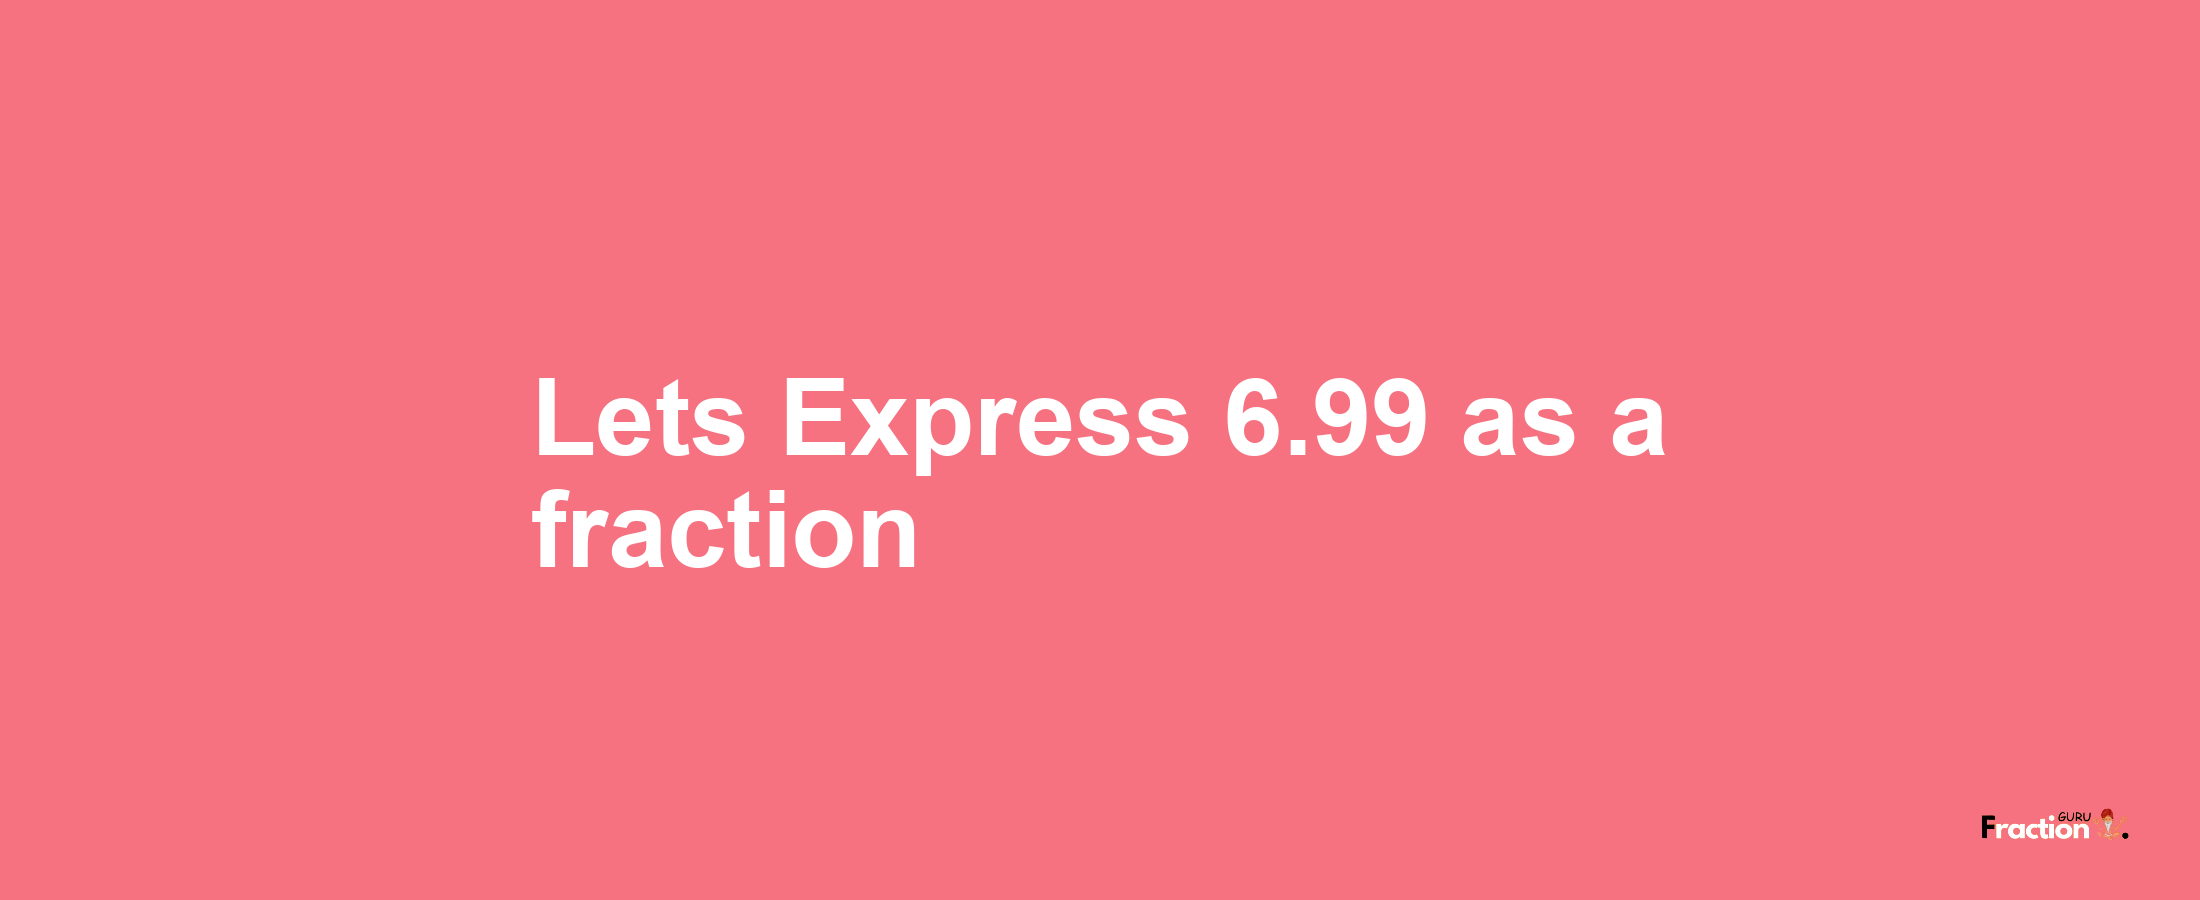 Lets Express 6.99 as afraction